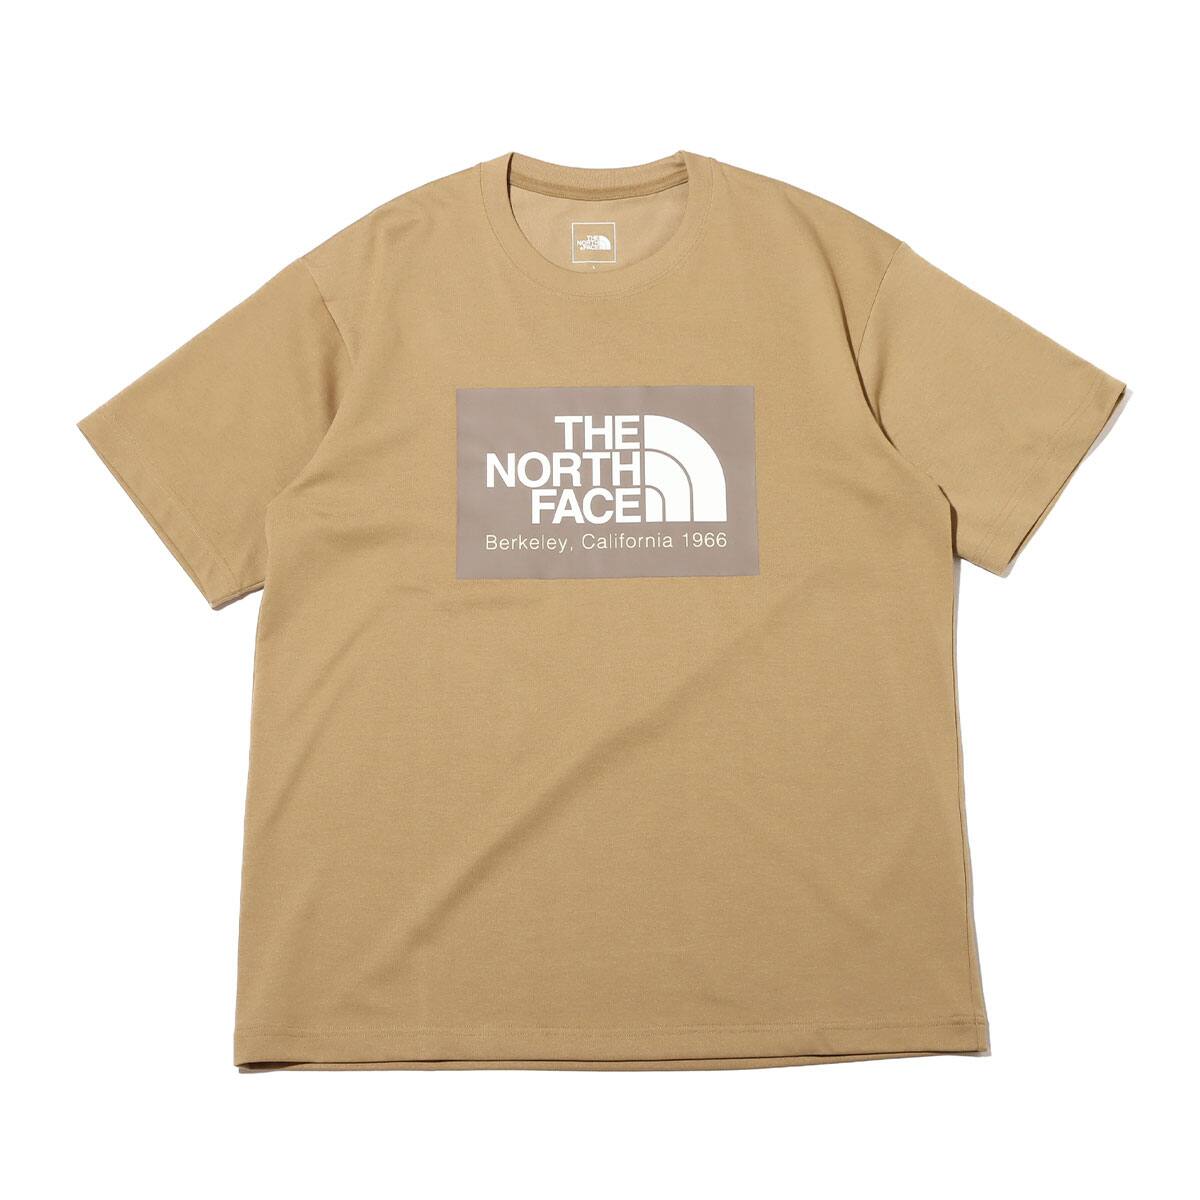 THE NORTH FACE S/S CALIFORNIA LOGO TEE ケルプタン 23SS-I_photo_large